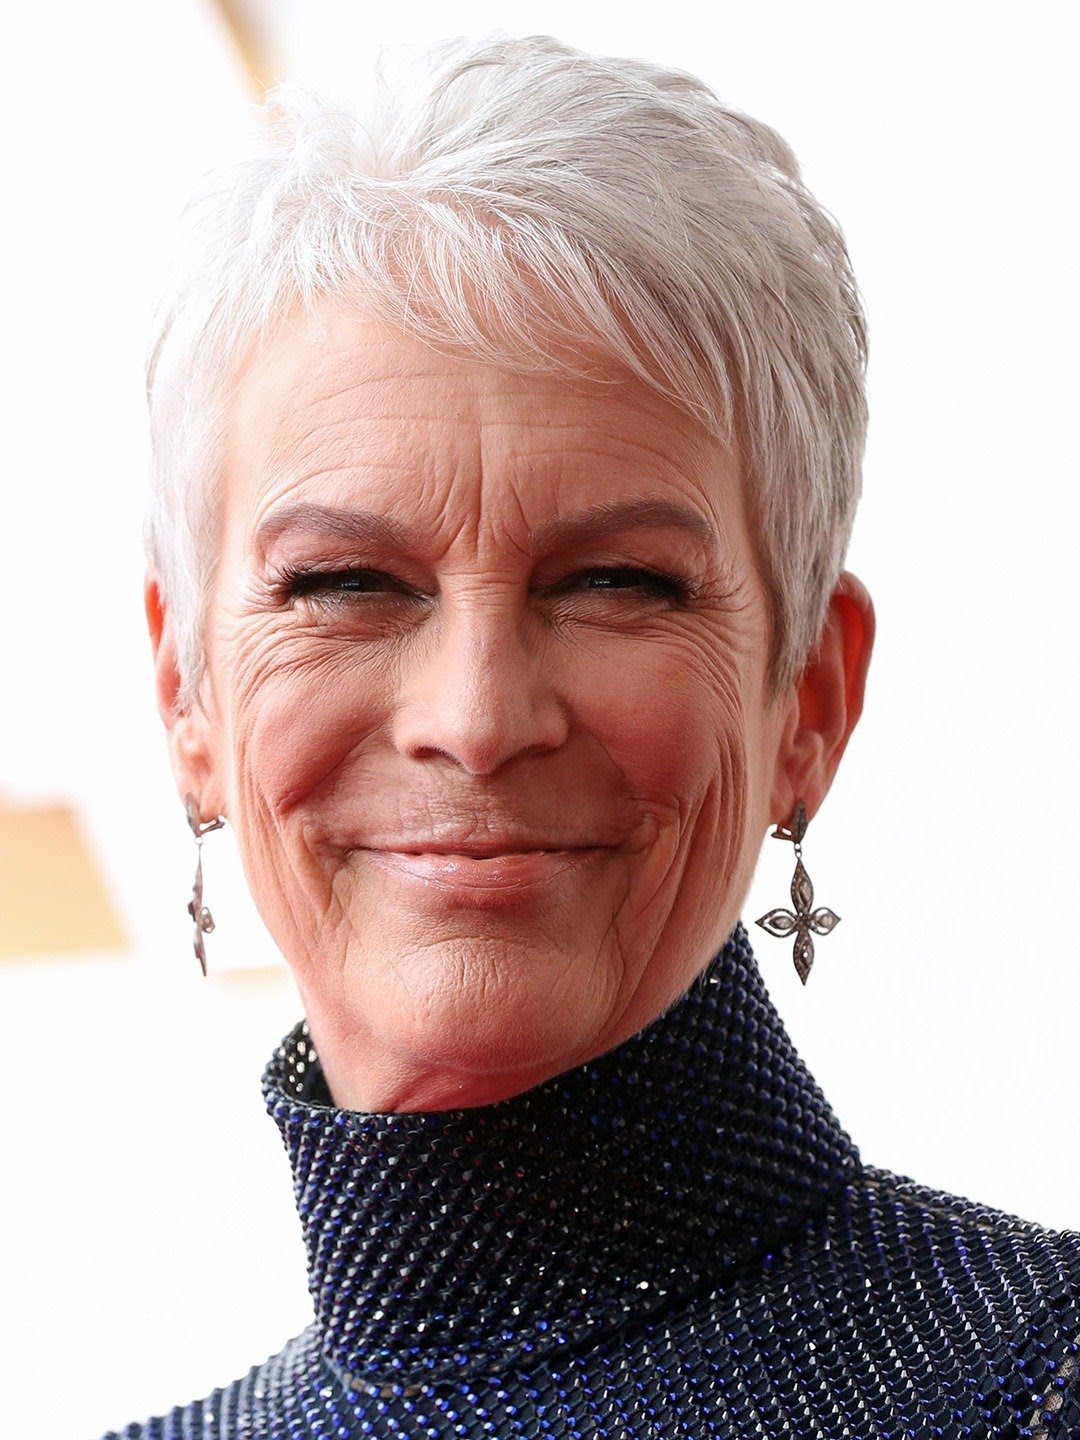 Jamie Lee Curtis is an American actress and author